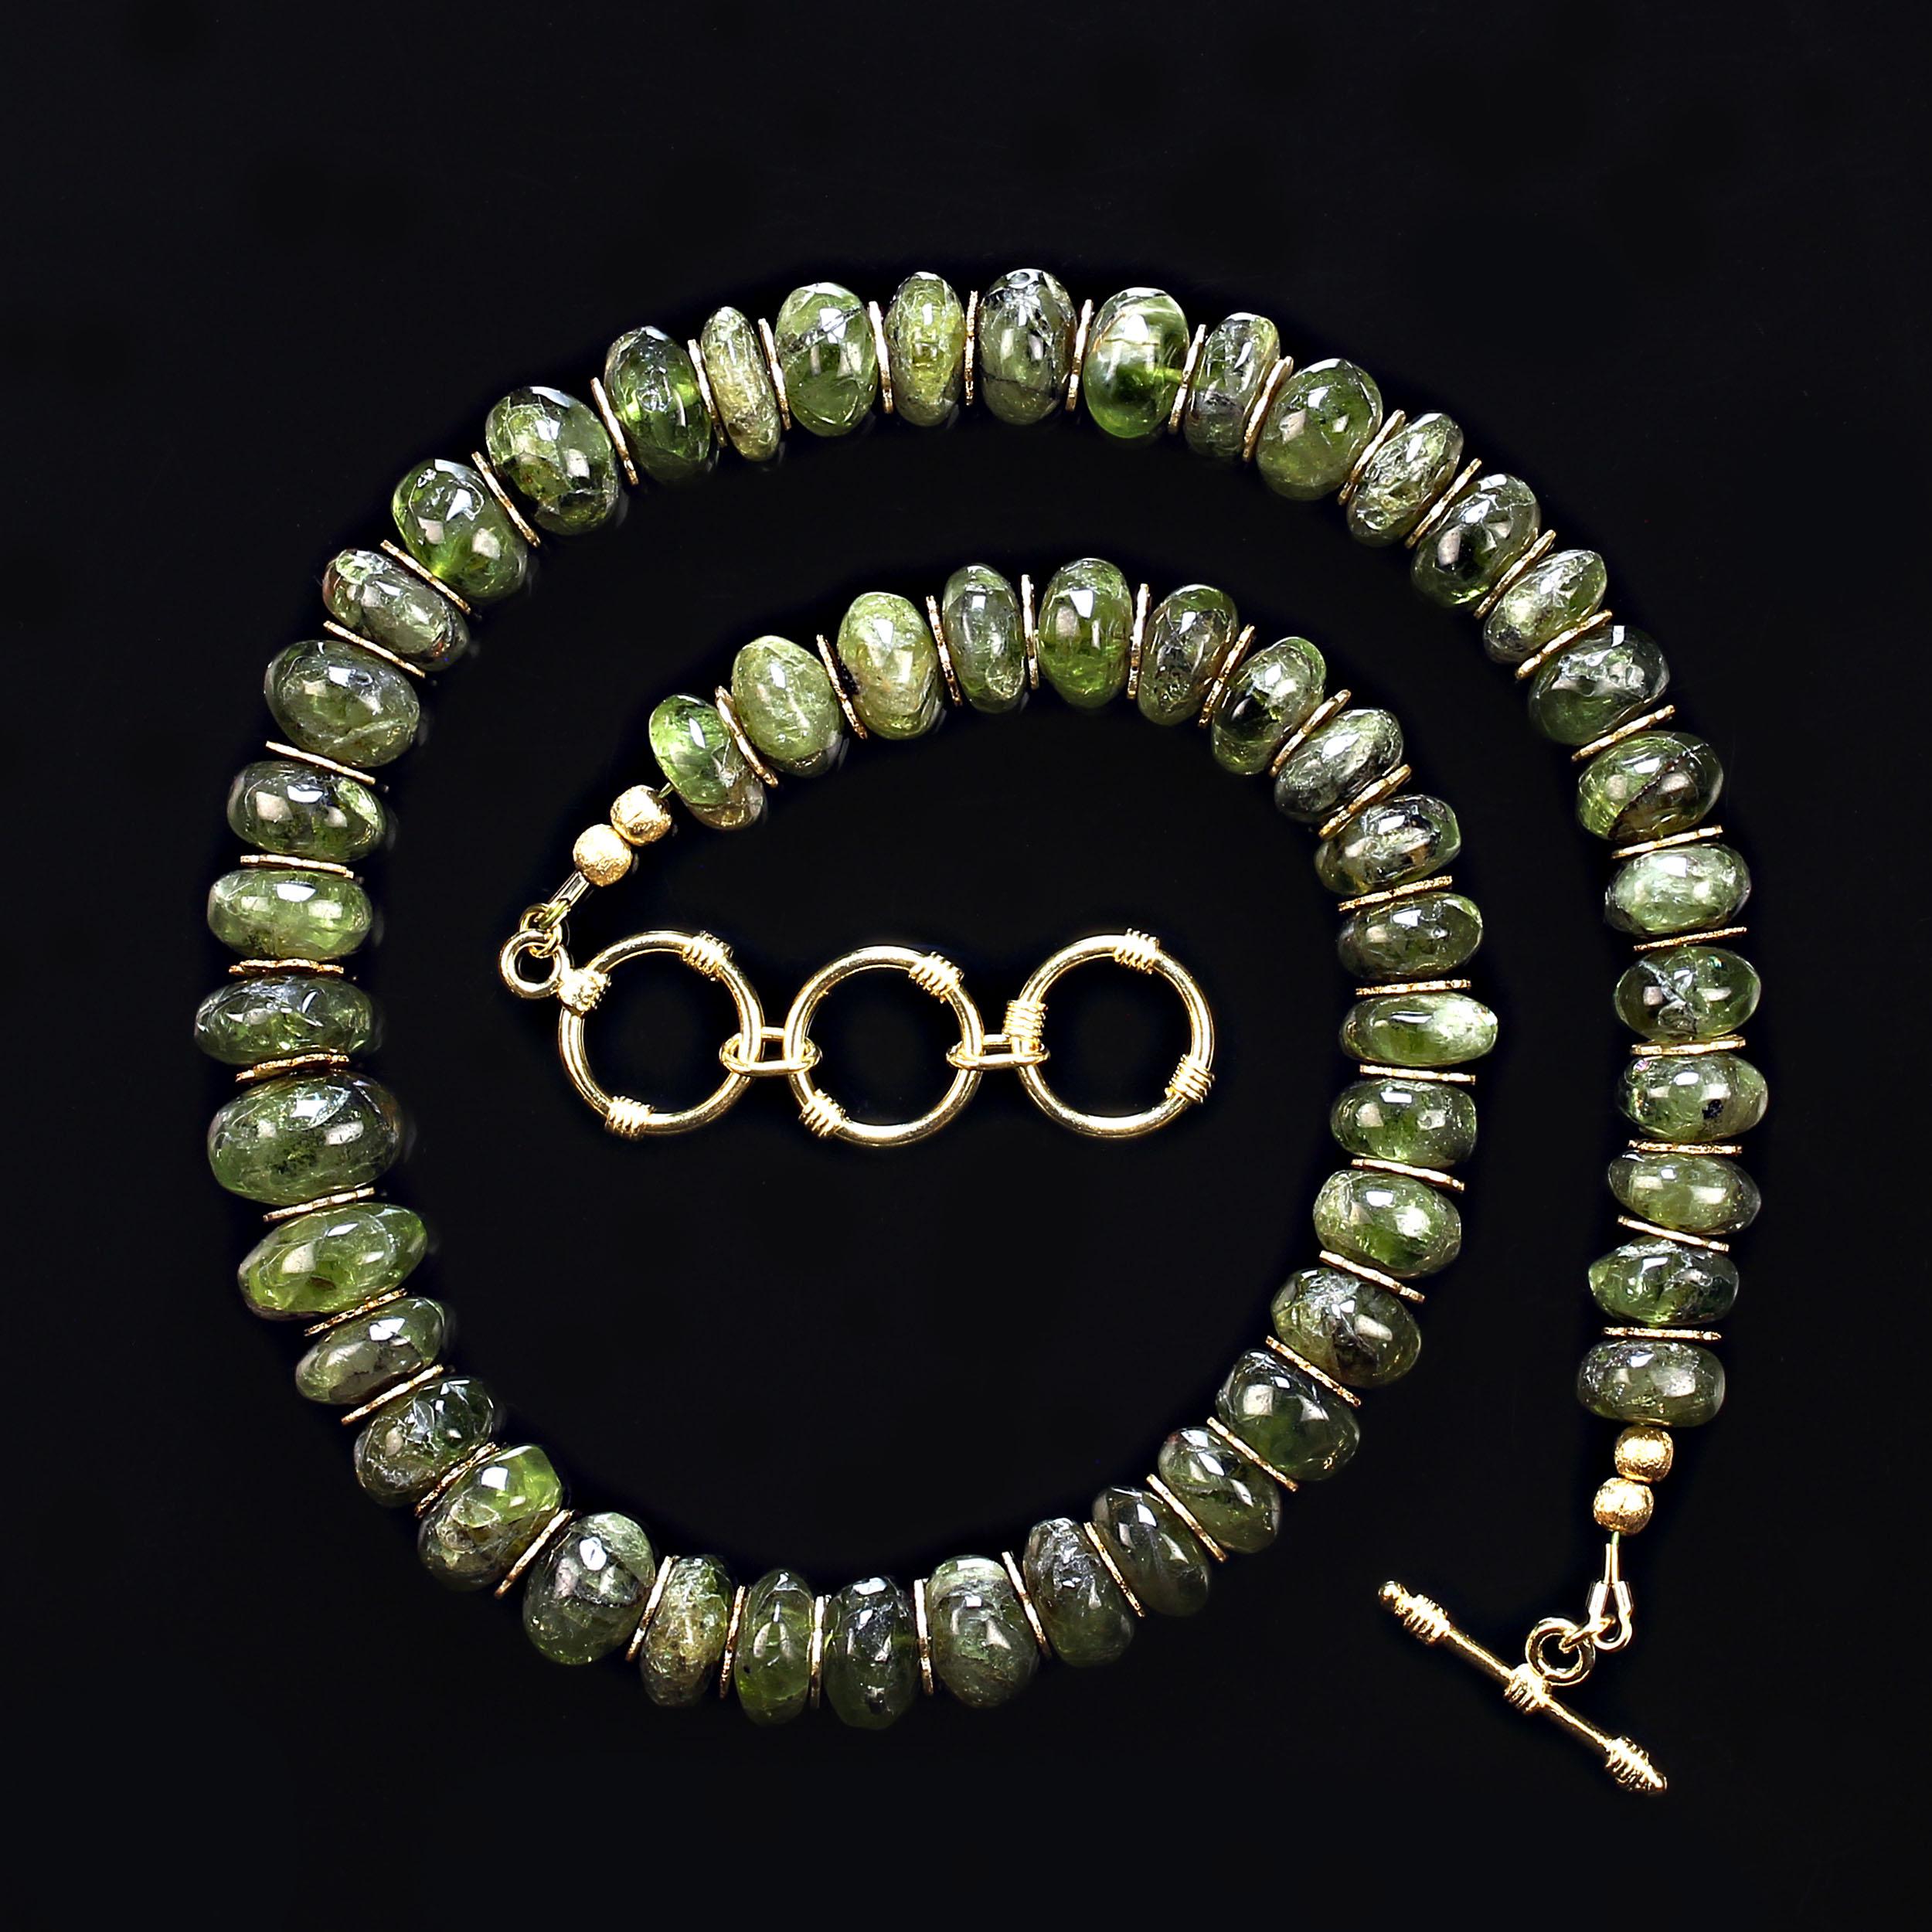 Bead AJD Unique 19 In Graduated Green Garnet Necklace with goldy accents  Great Gift! For Sale